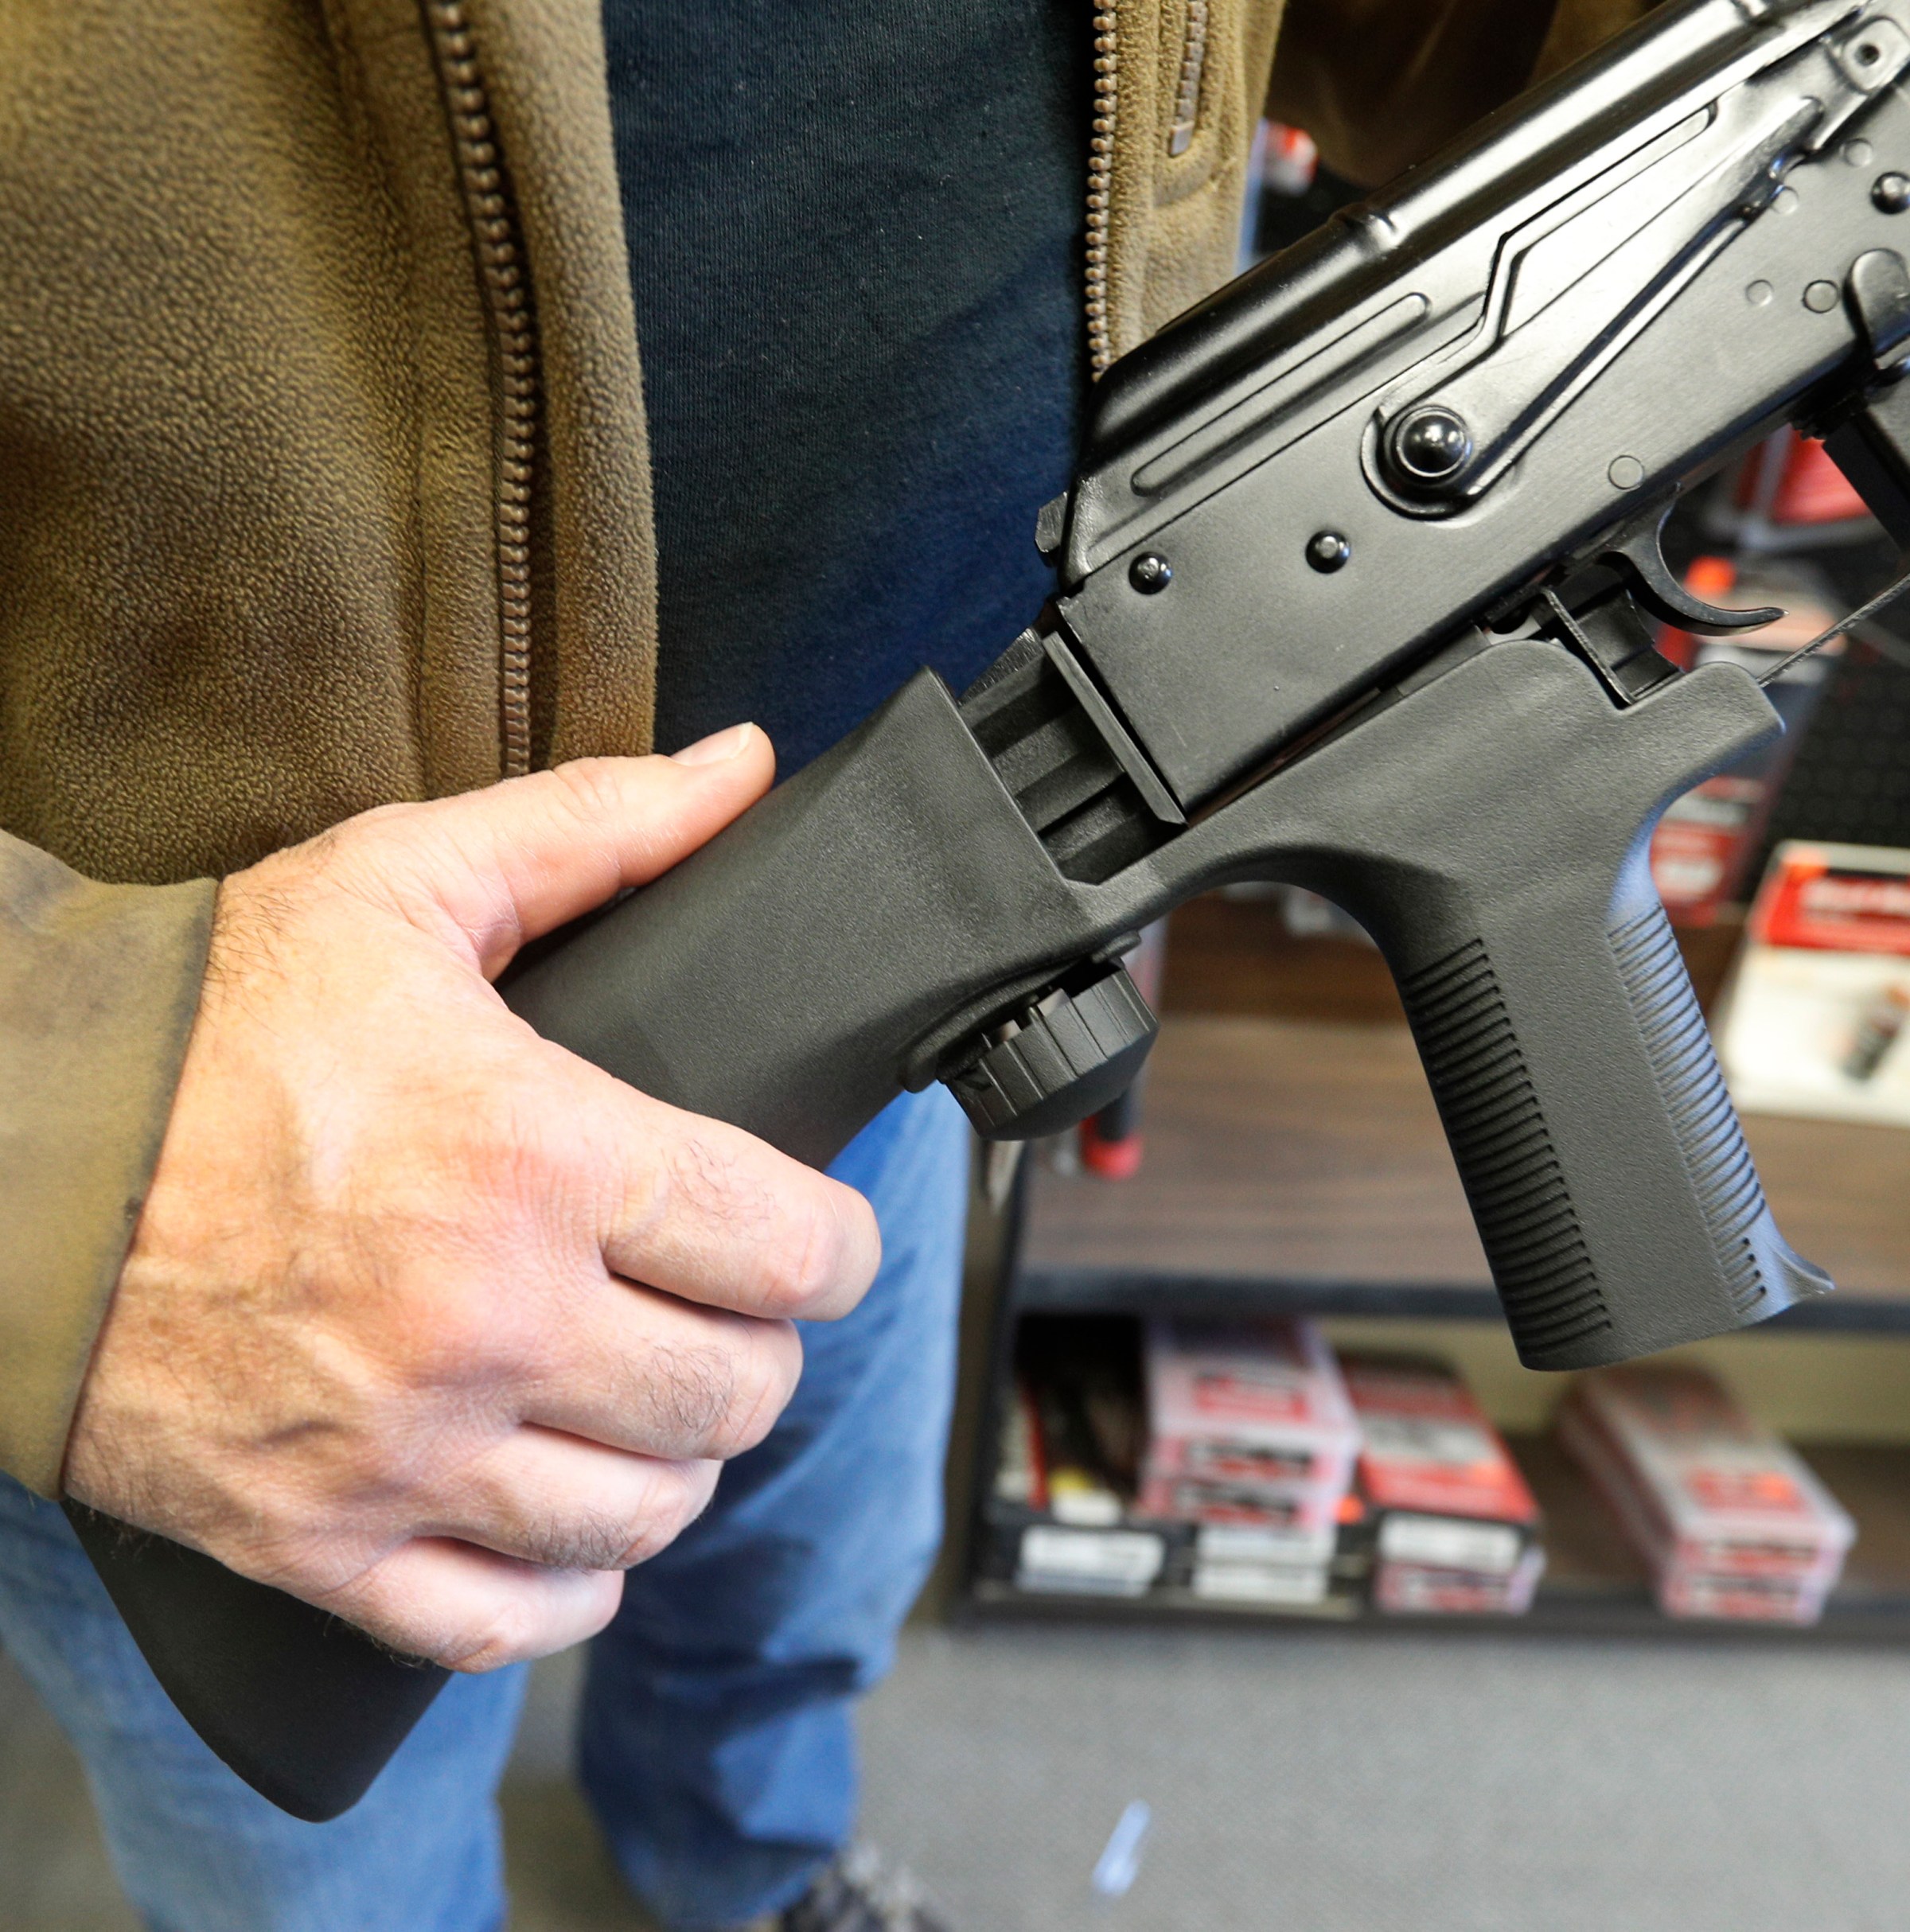 The Supreme Court will decide whether to let civilians own automatic weapons